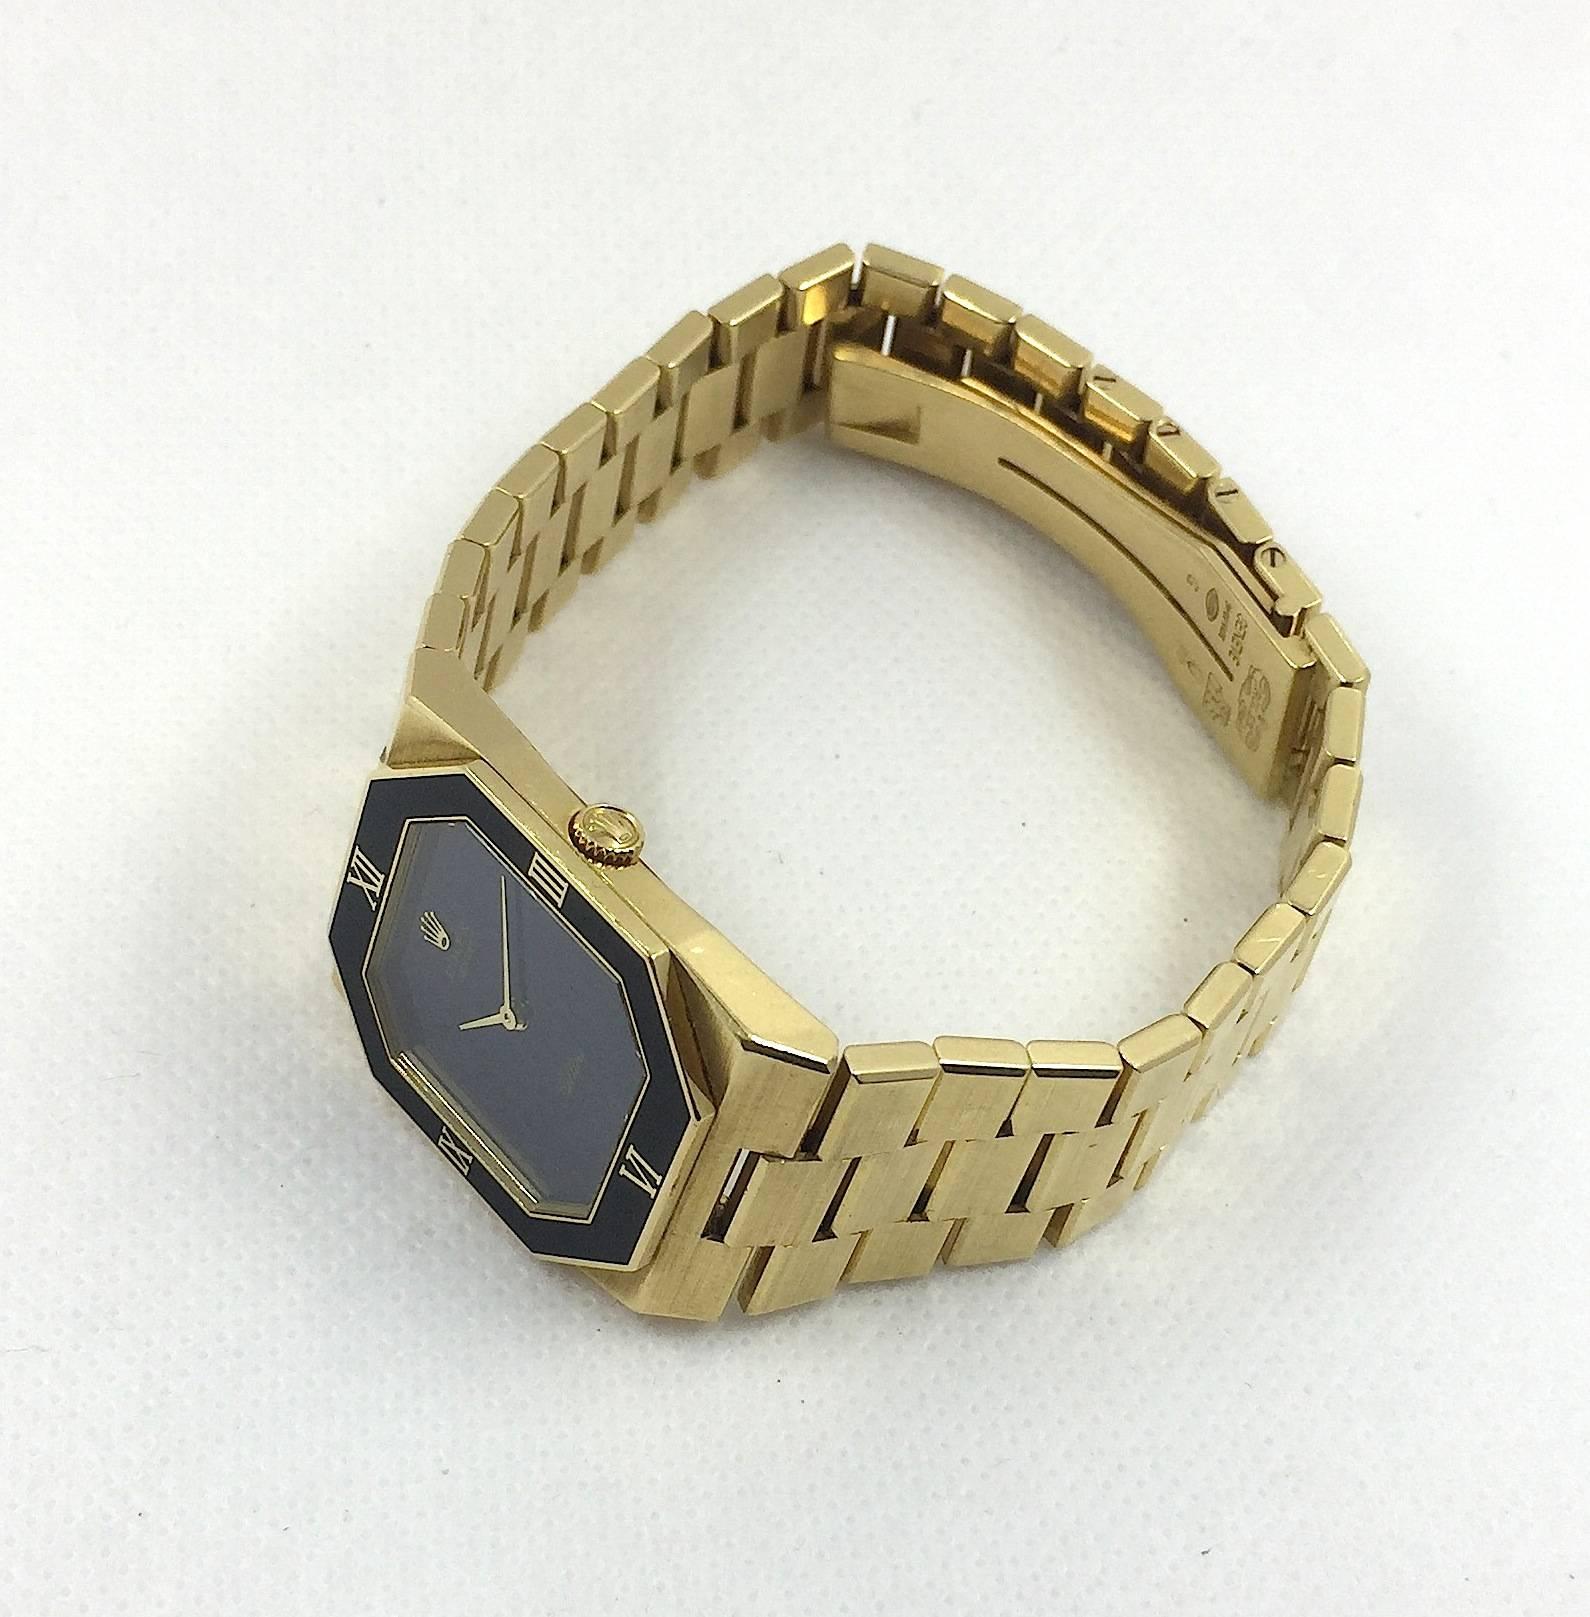 Rolex Yellow Gold Cellini Manual Wind Wristwatch In Excellent Condition For Sale In New York, NY